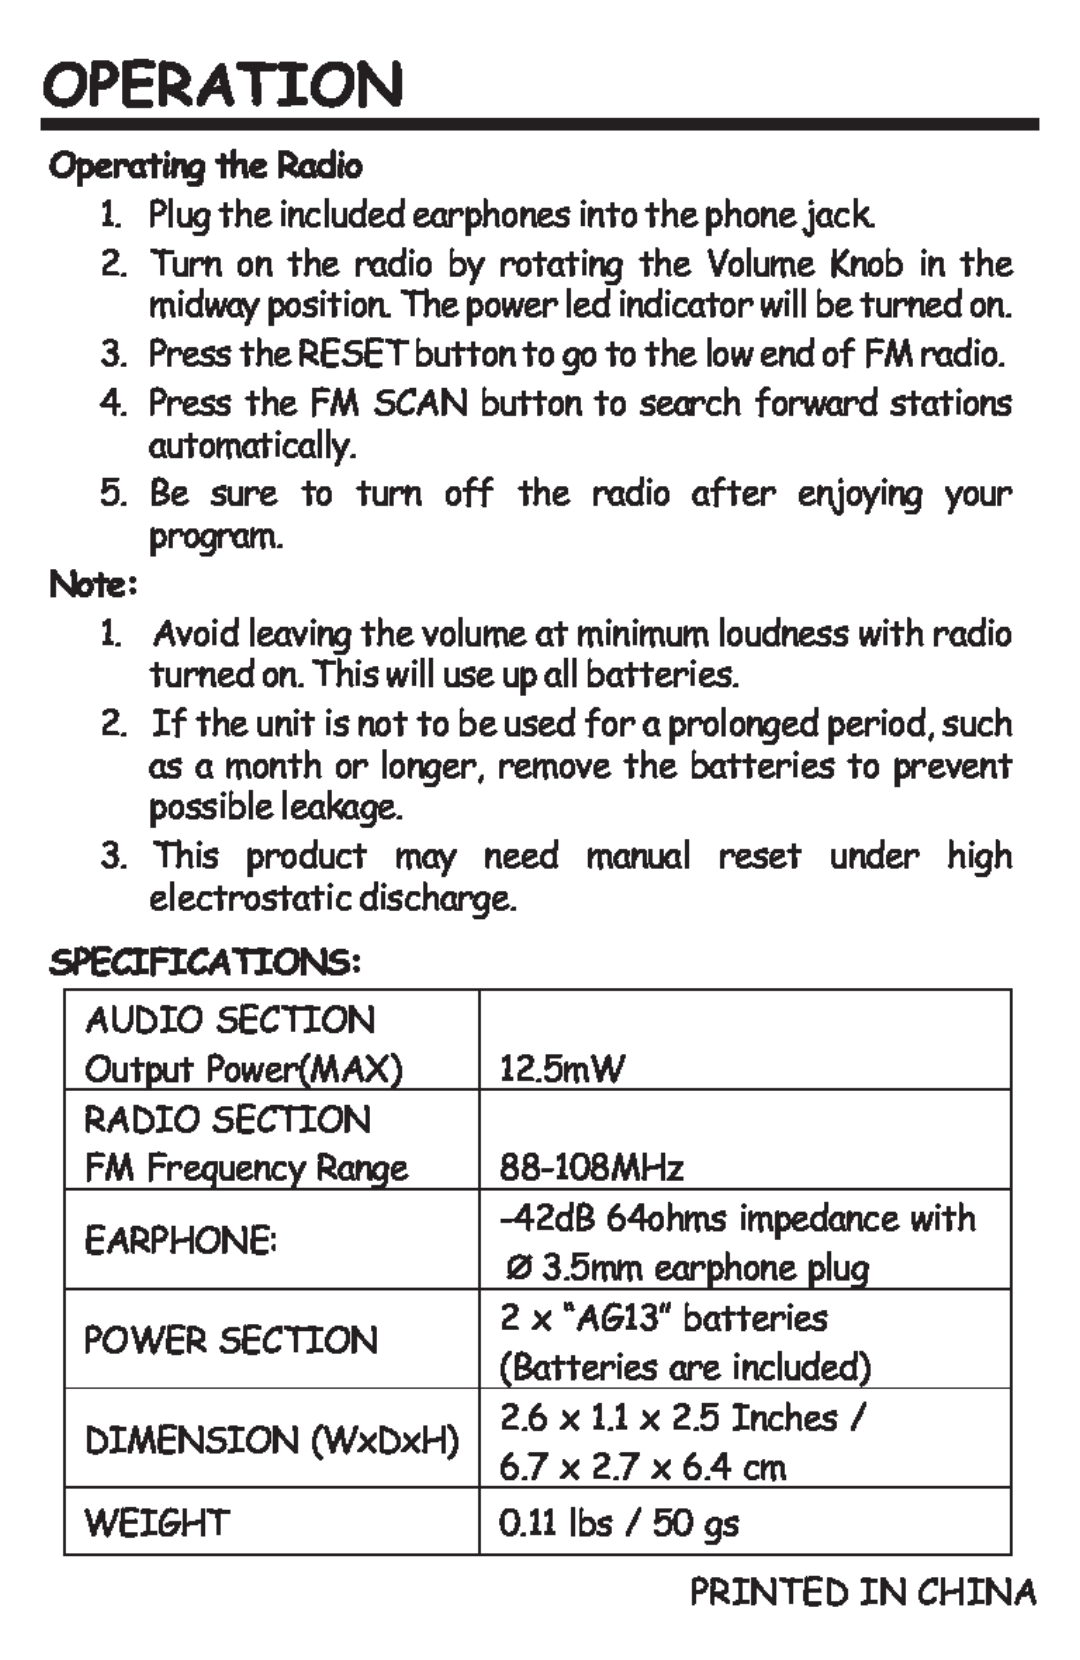 The Singing Machine SMB-632 Operation, Operating the Radio, Plug the included earphones into the phone jack, Audio Section 